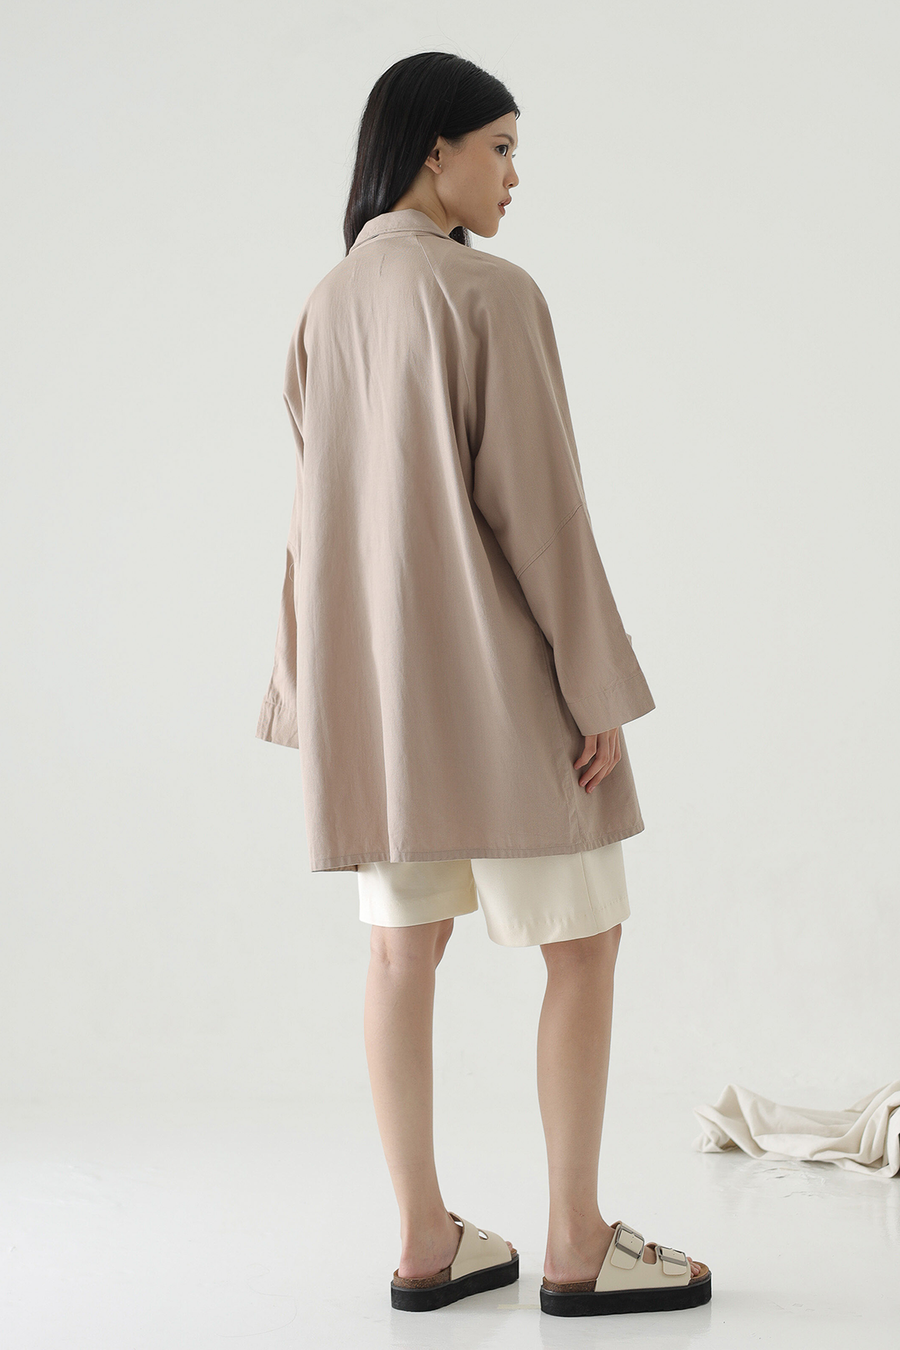 Latte Spring Outer